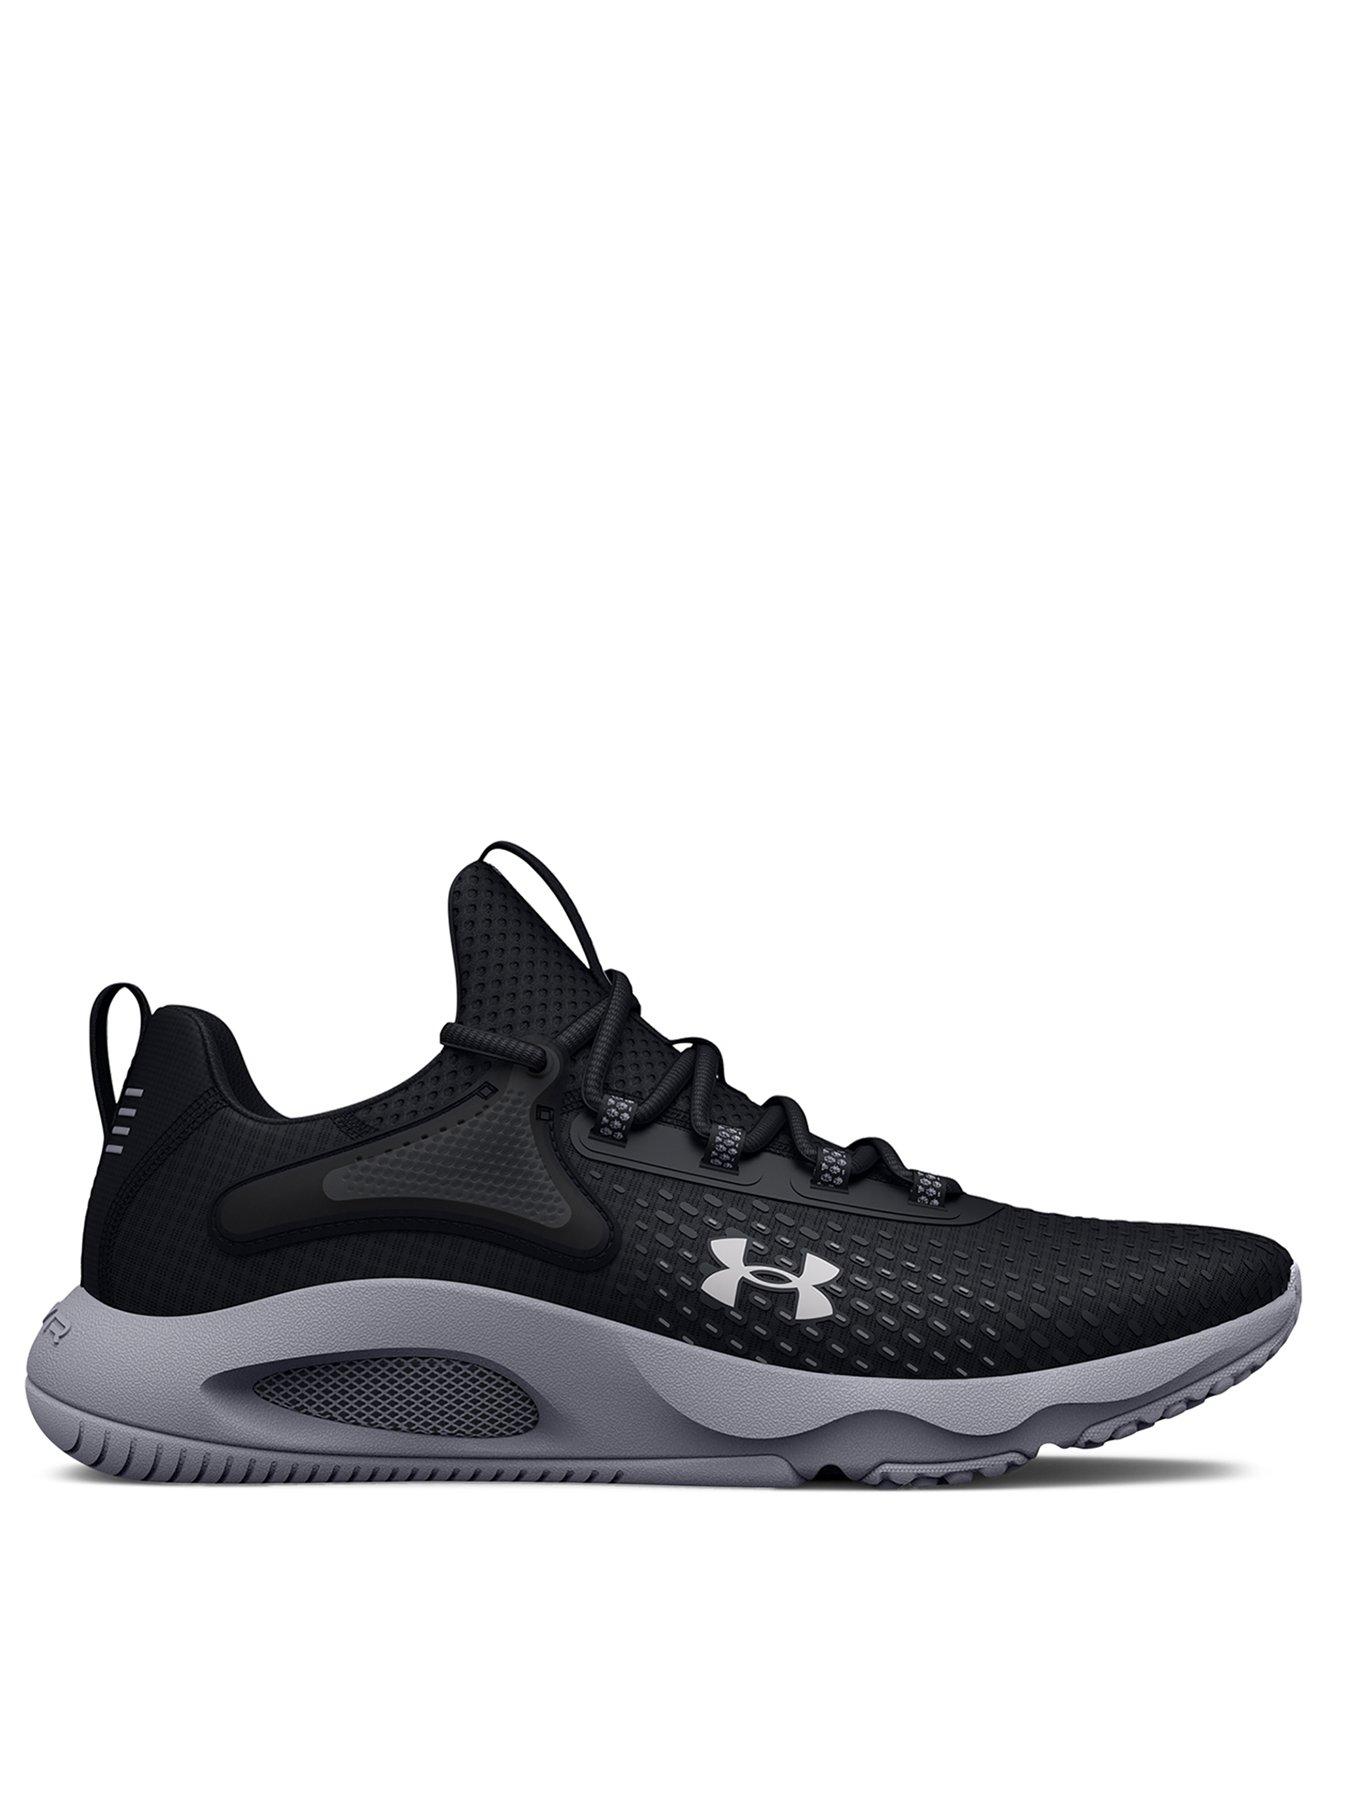 UNDER ARMOUR HOVR Rise 4 - Black/Grey | very.co.uk